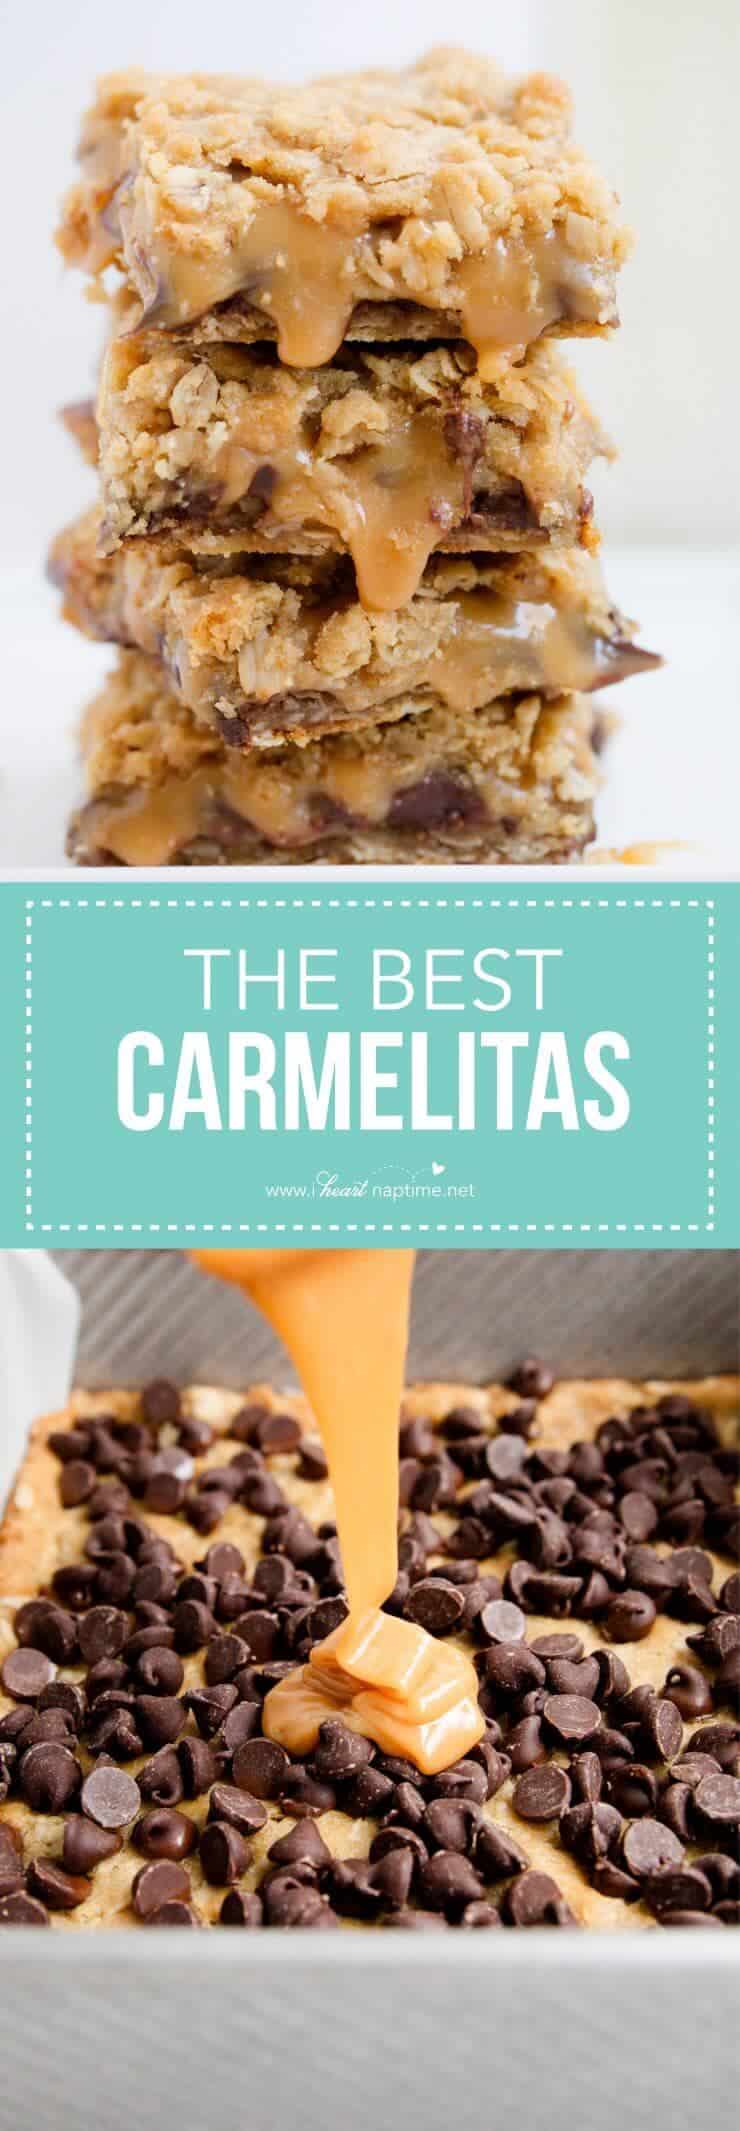 Ooey gooey carmelitas recipe -a soft and chewy brown sugar oatmeal cookie crust with a thick layer of chocolate and caramel. Take one bite and you'll be hooked!